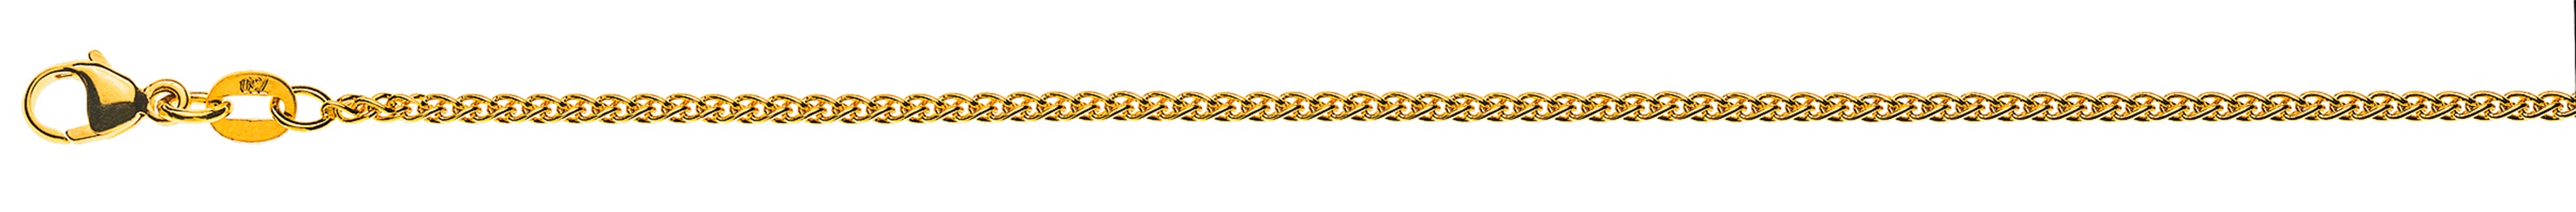 AURONOS Style Necklace yellow gold 9K cable chain 40cm 1.65mm